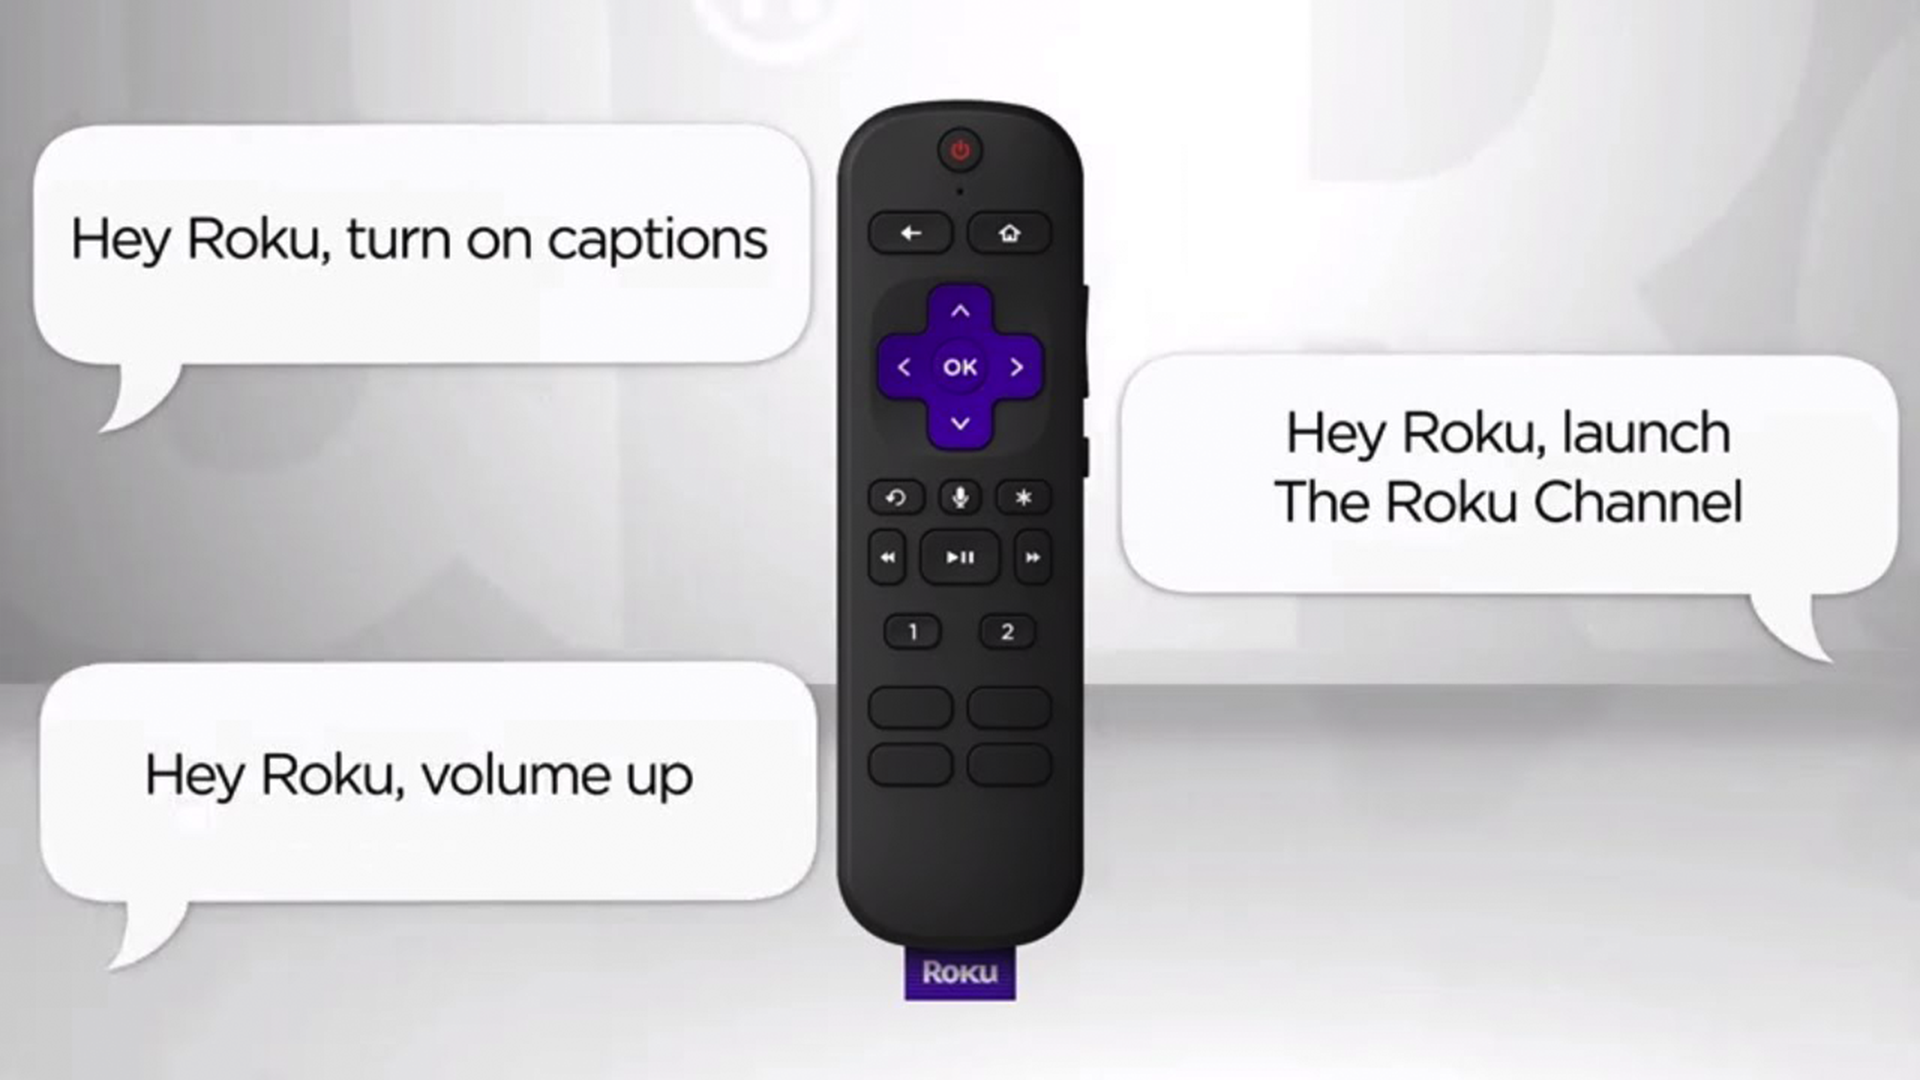 Some voice commands for the Roku Voice Remote.